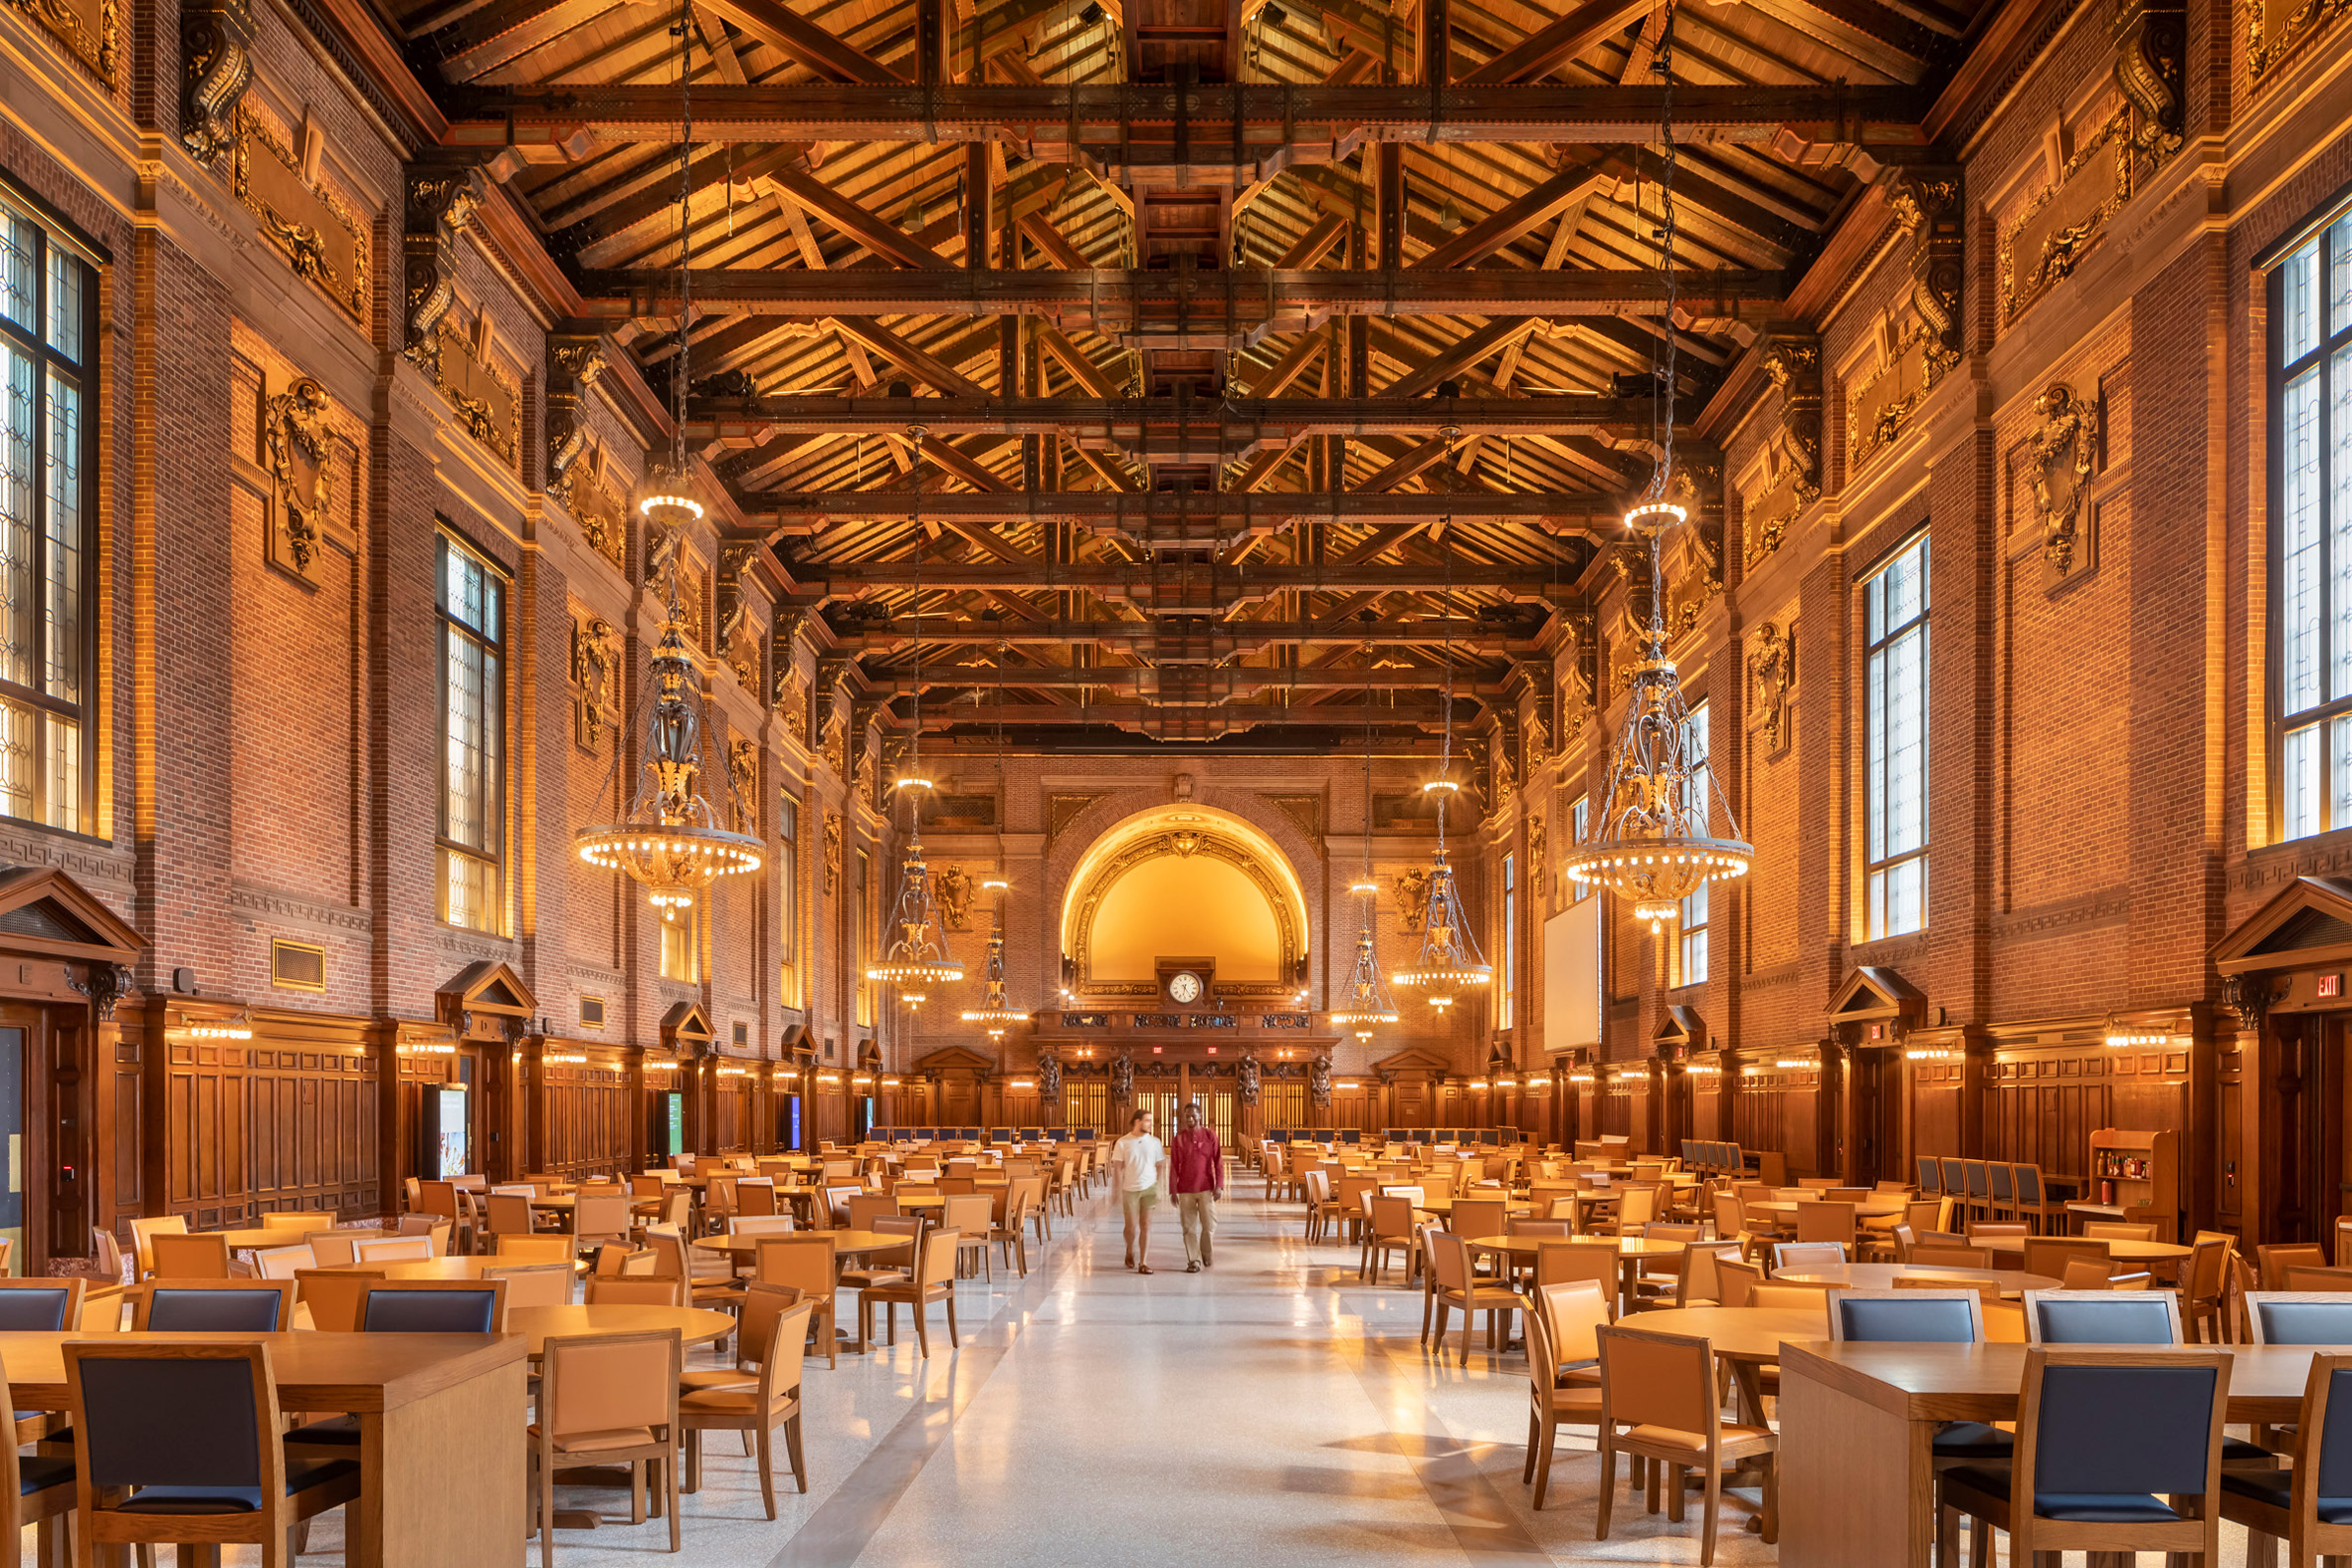 A large dining hall at Yale University